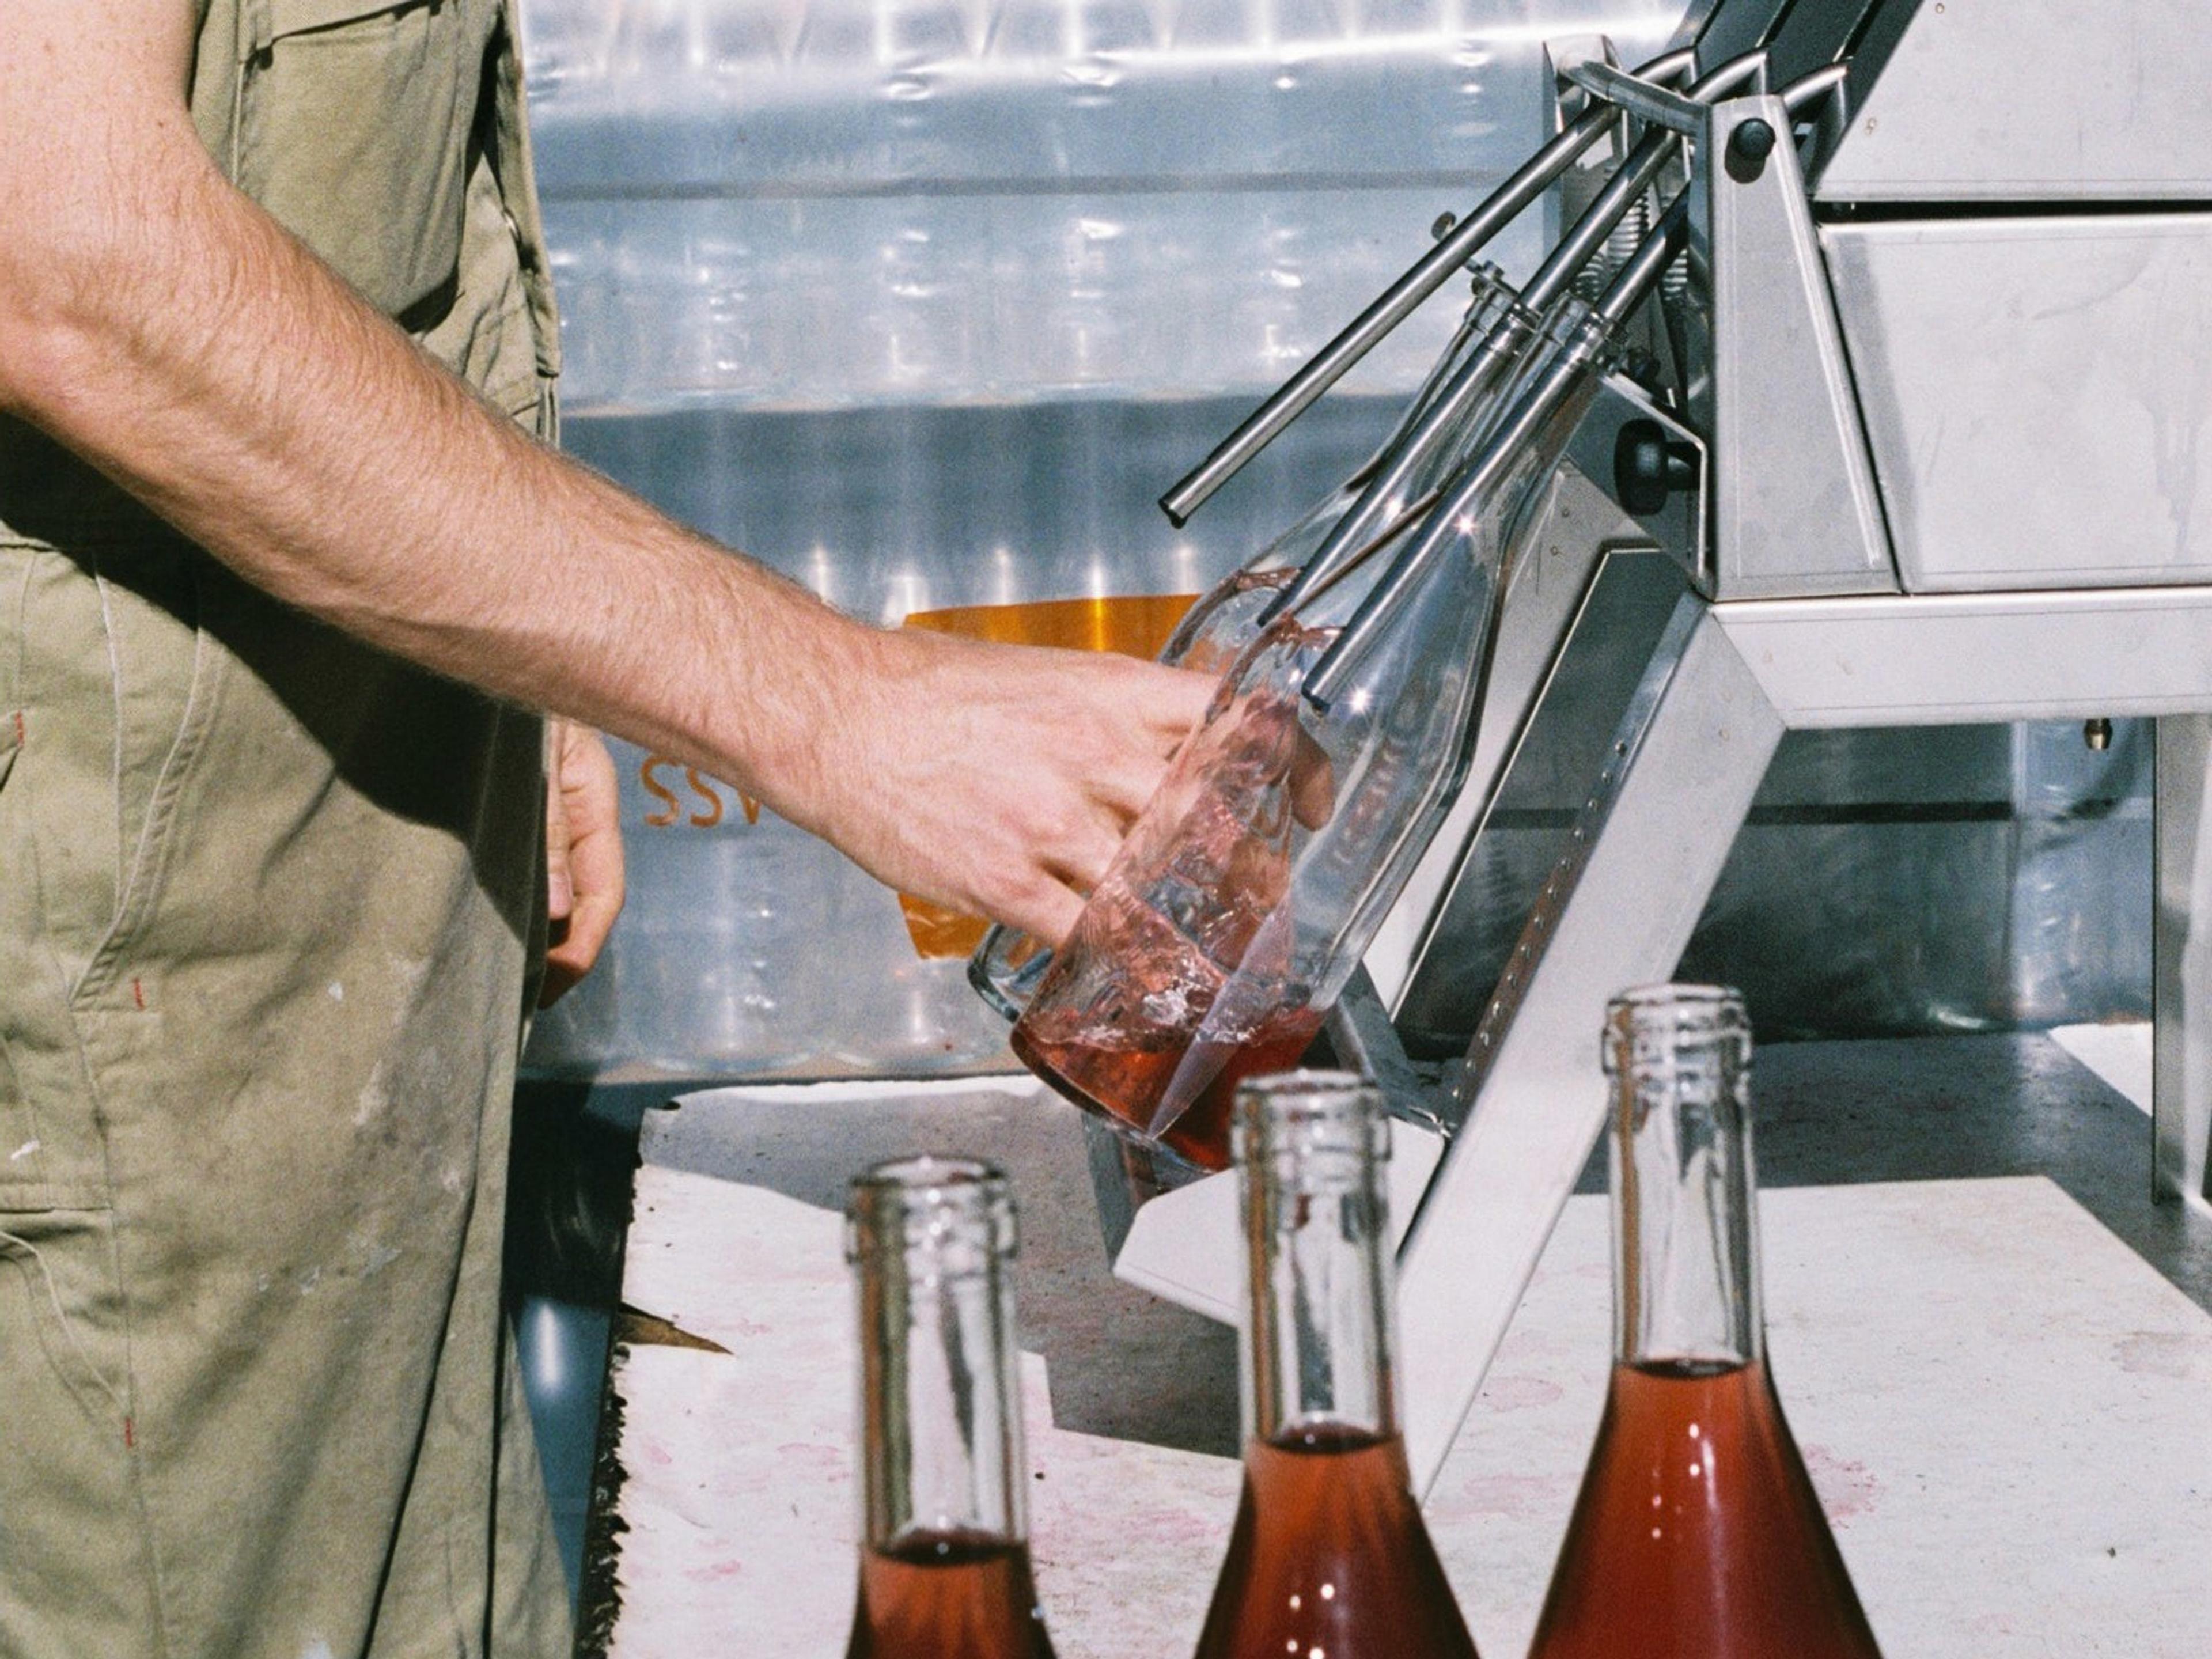 A person bottling wine using a machine.